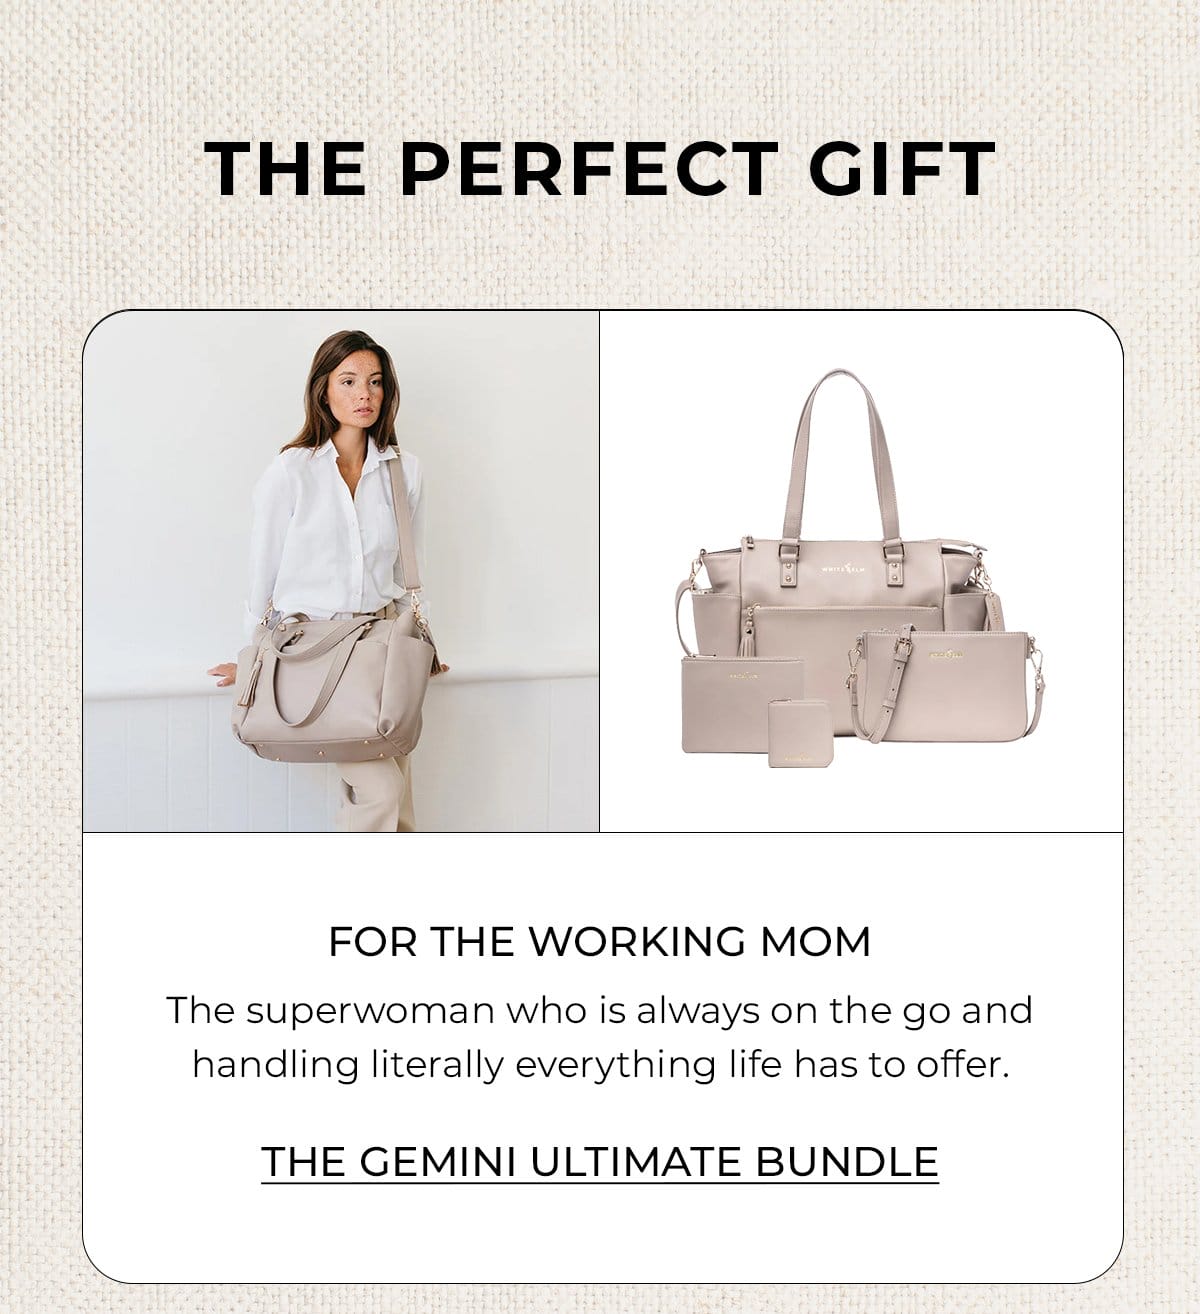 The Perfect Gift For the Working Mom